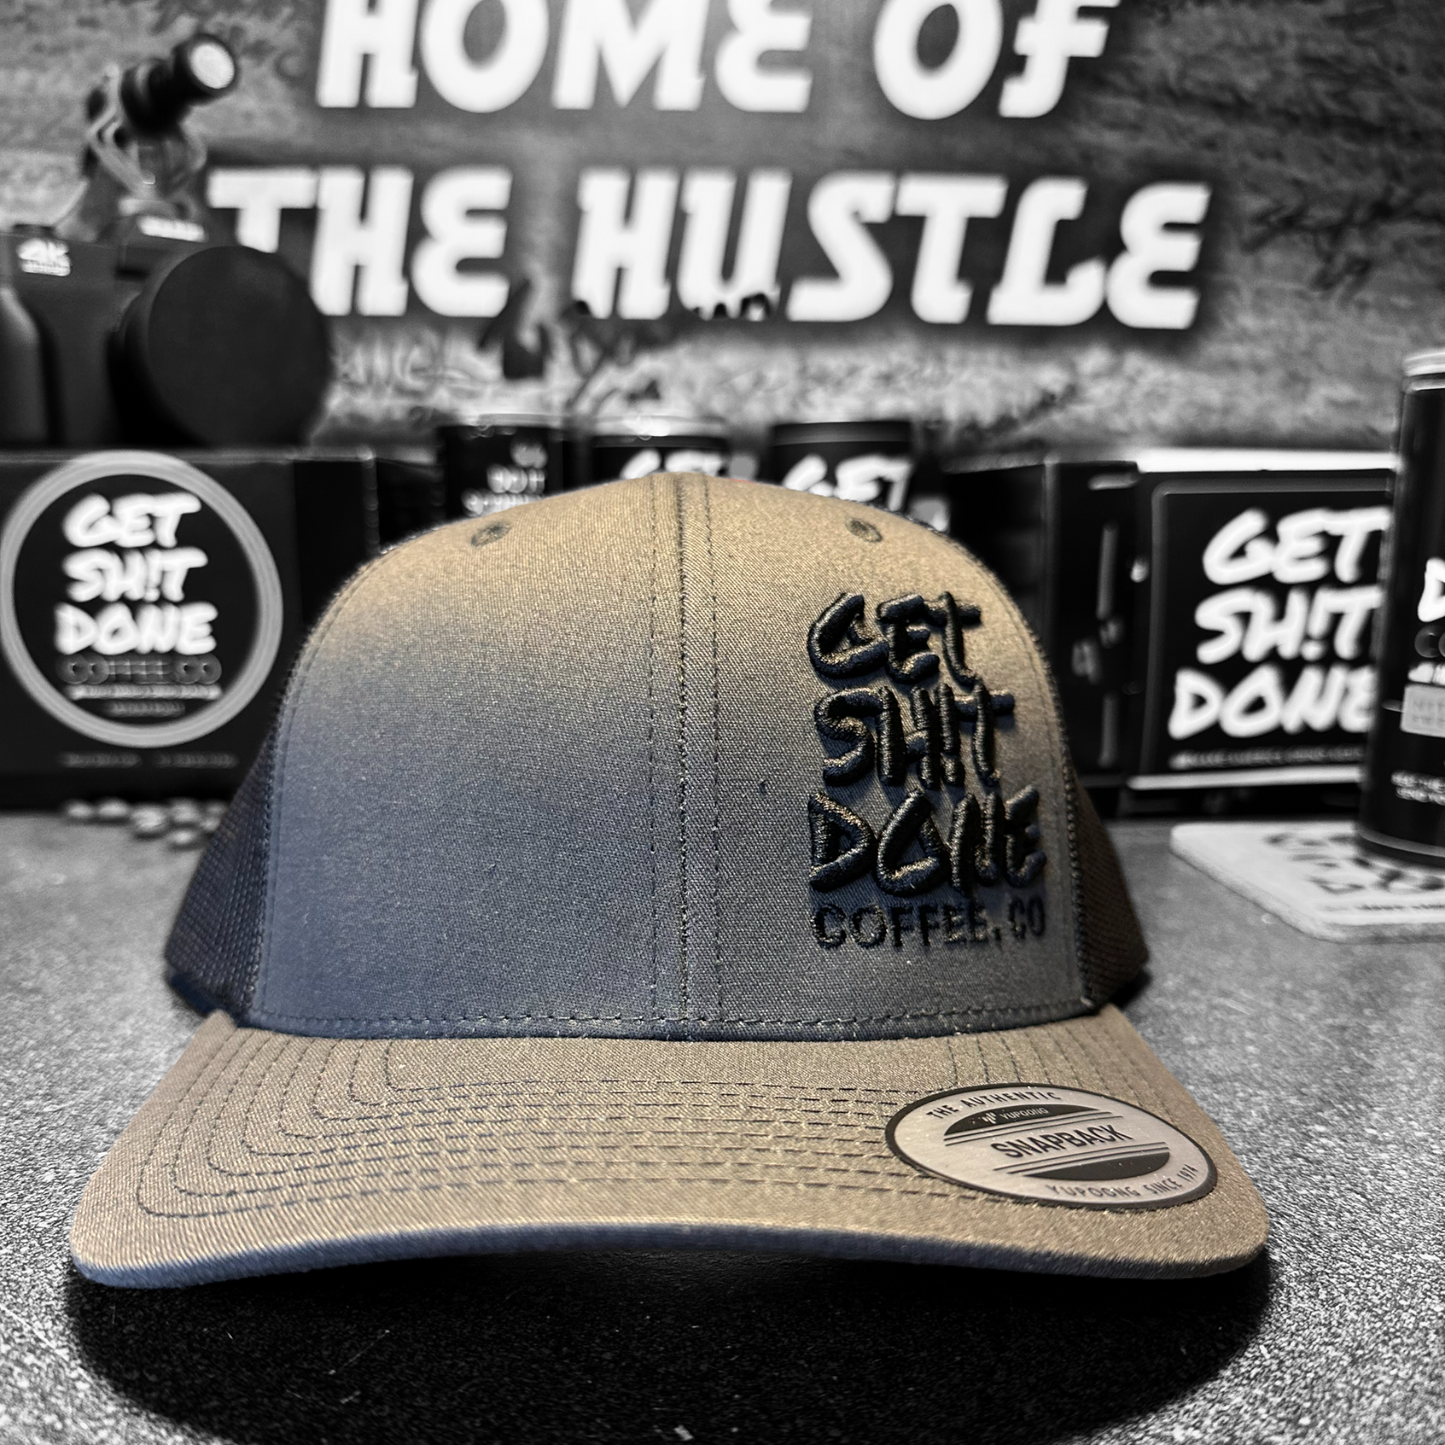 GSD COFFEE.CO Snap Back